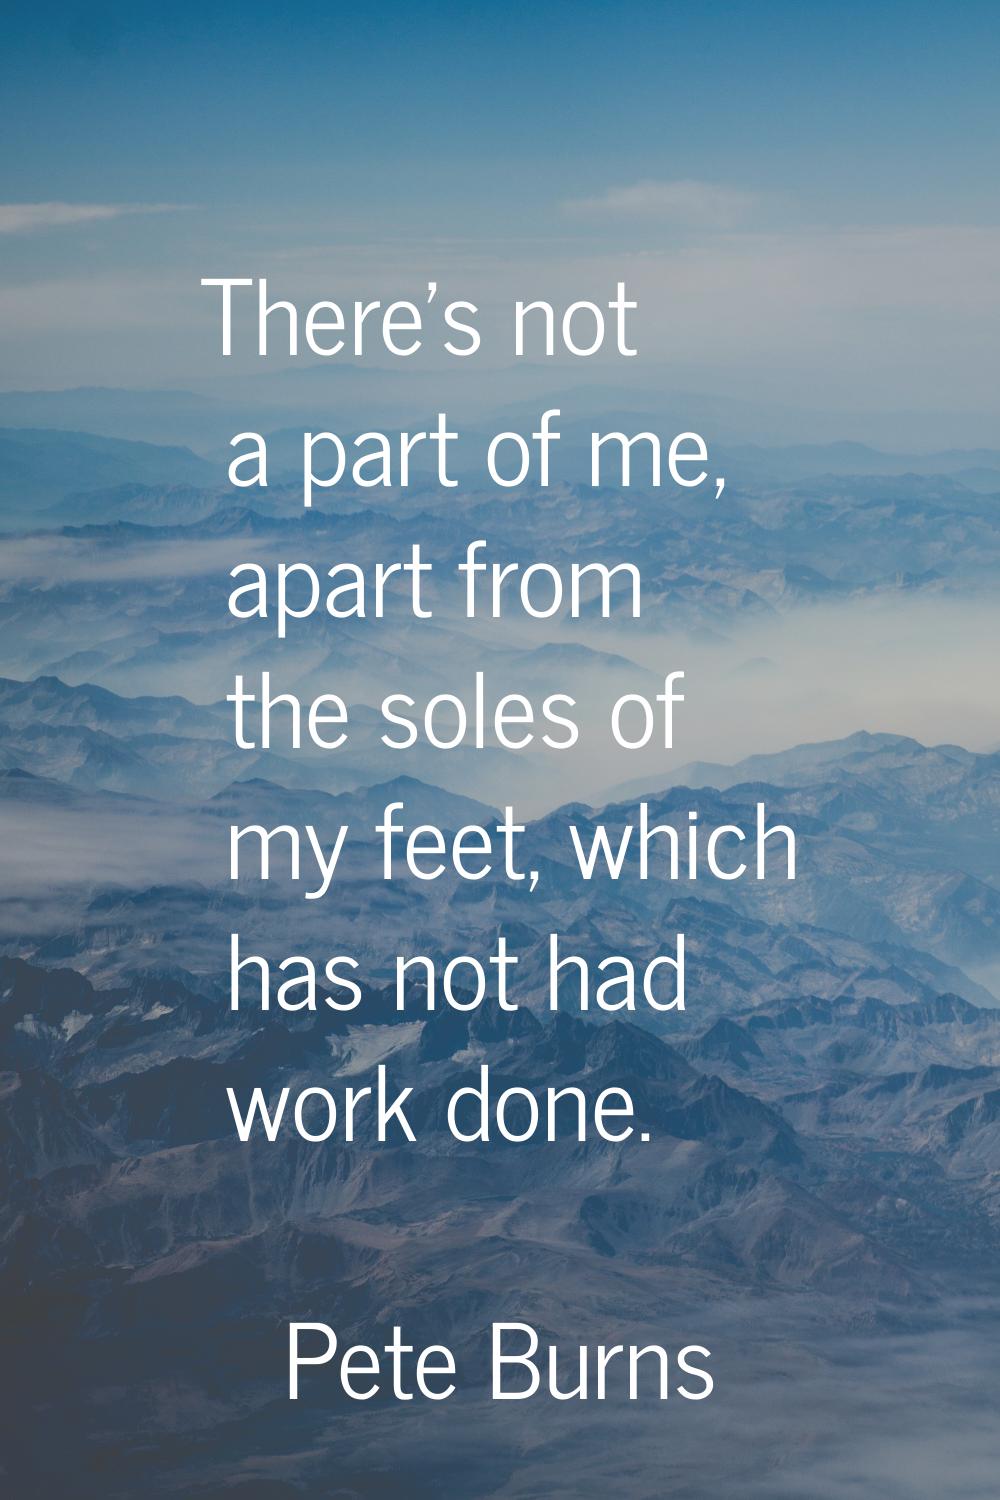 There's not a part of me, apart from the soles of my feet, which has not had work done.